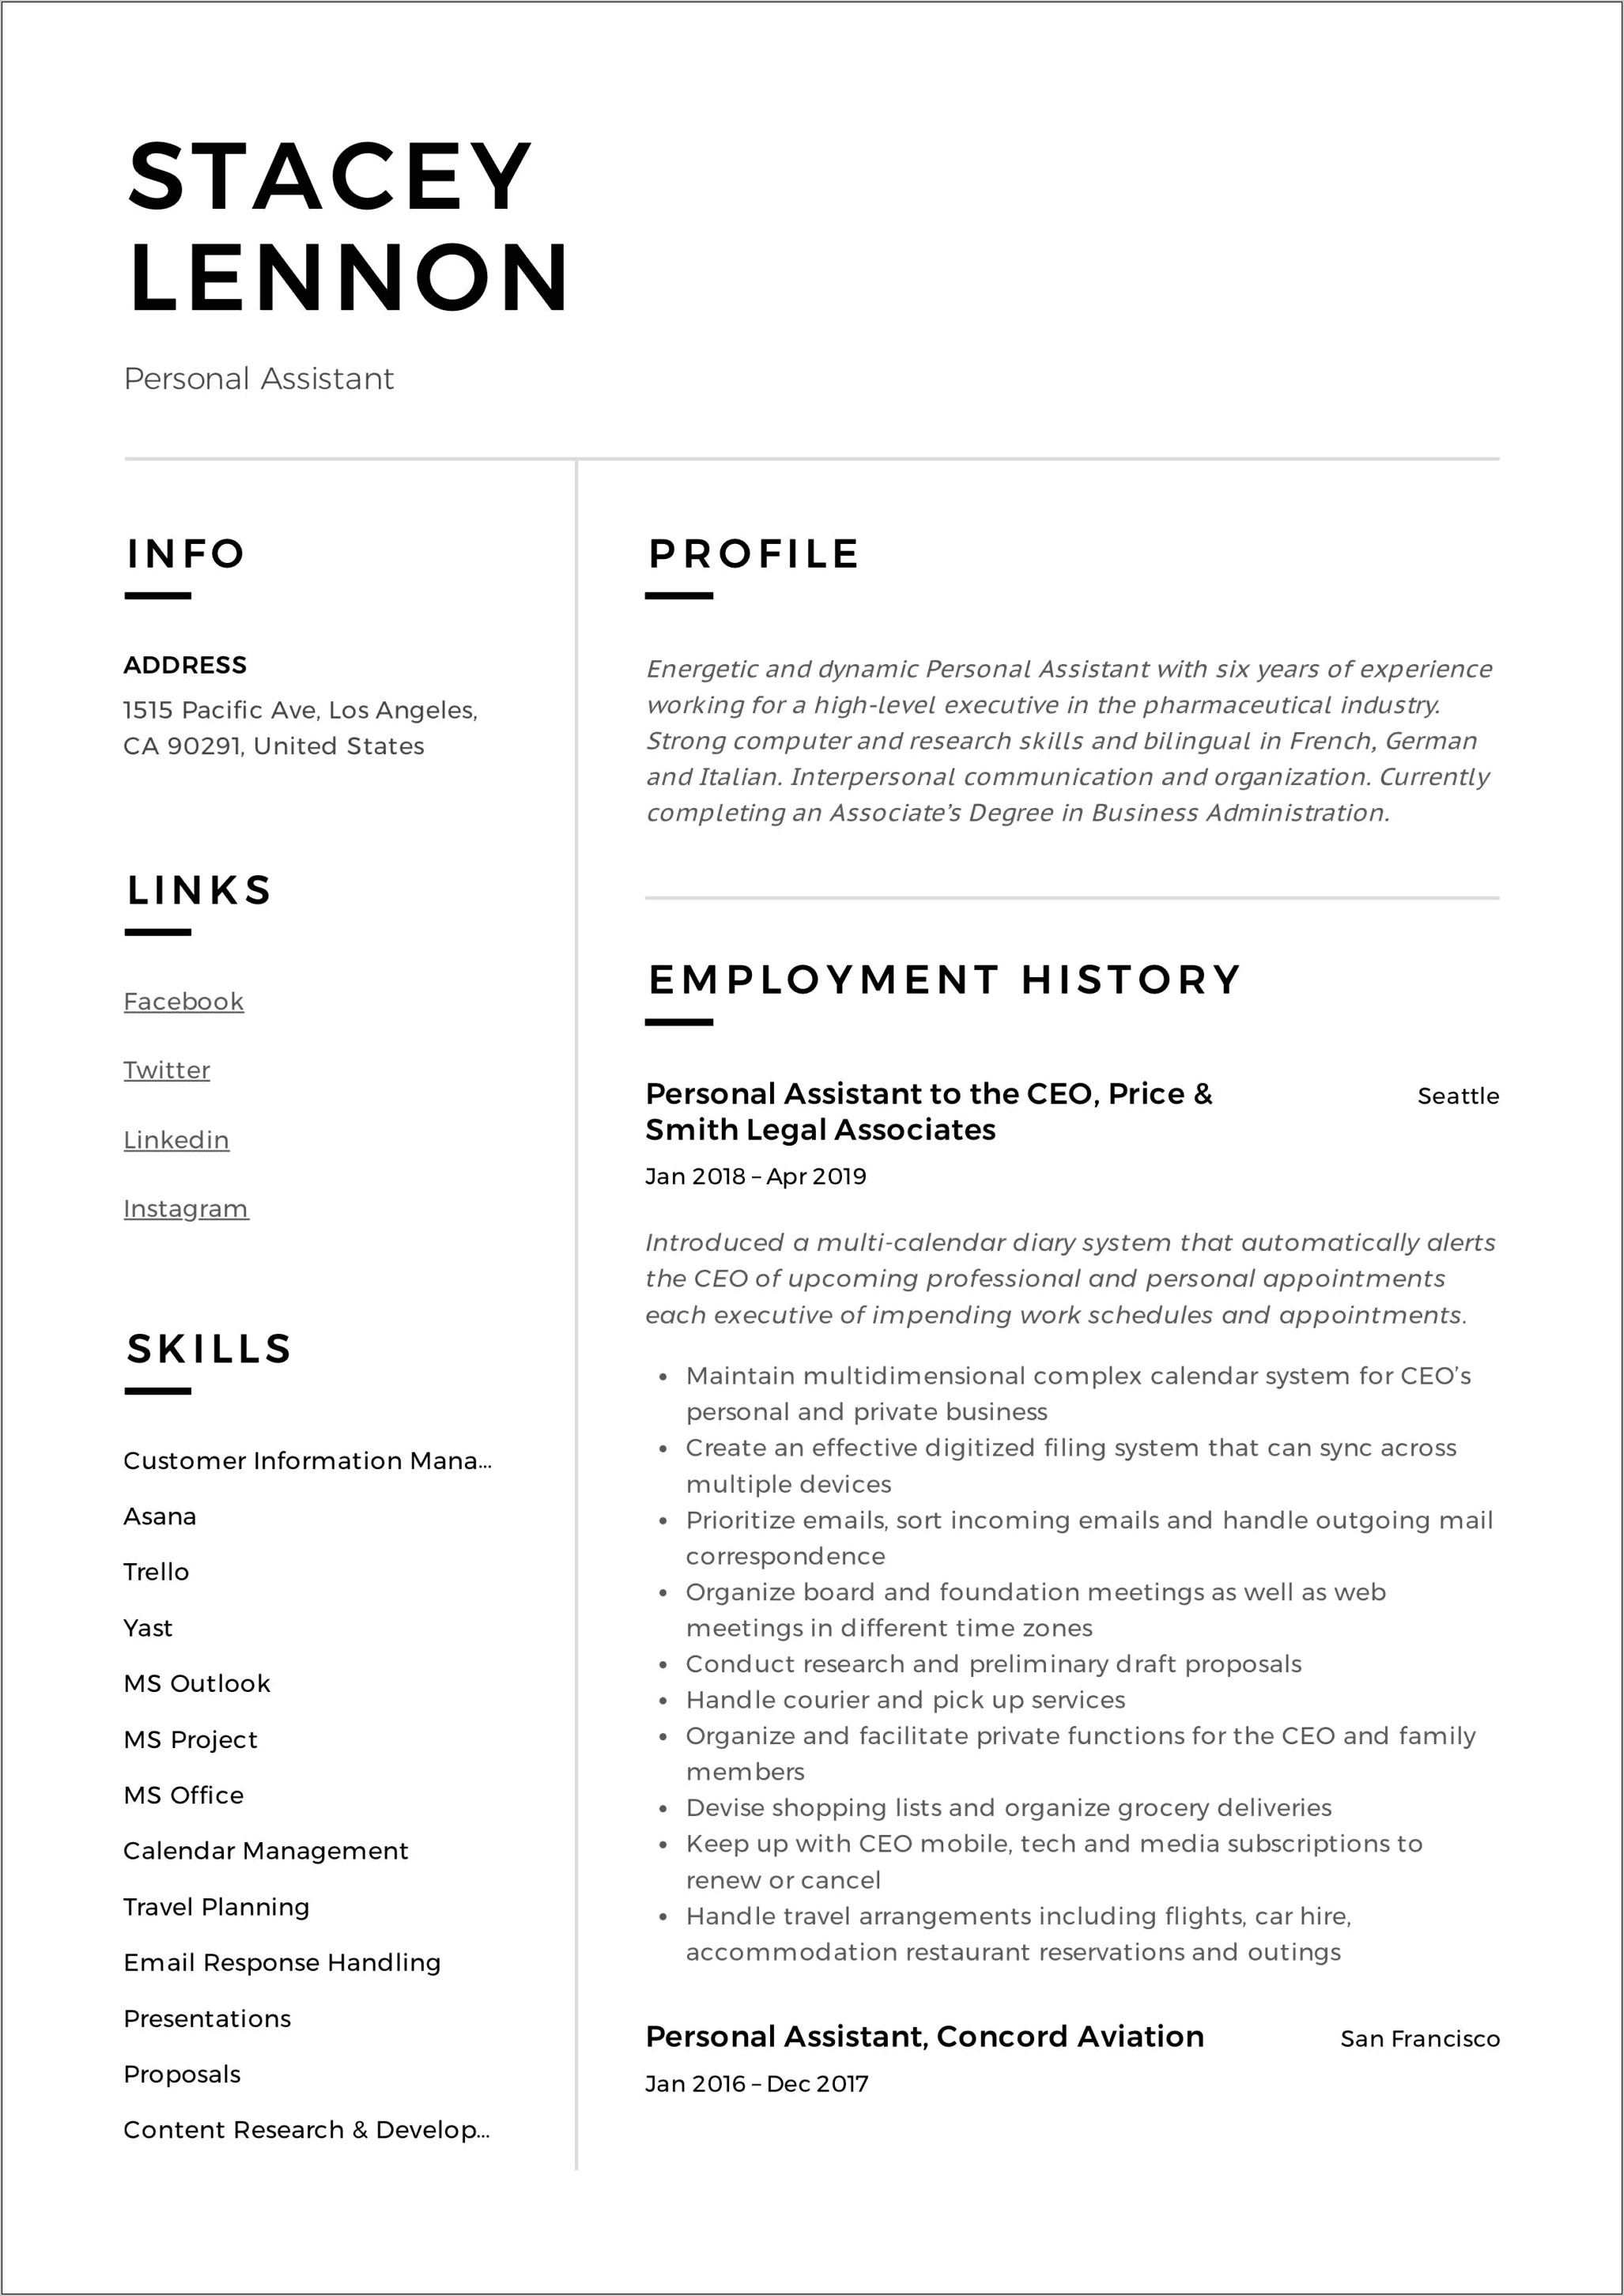 Resume Skills For Library Assistant